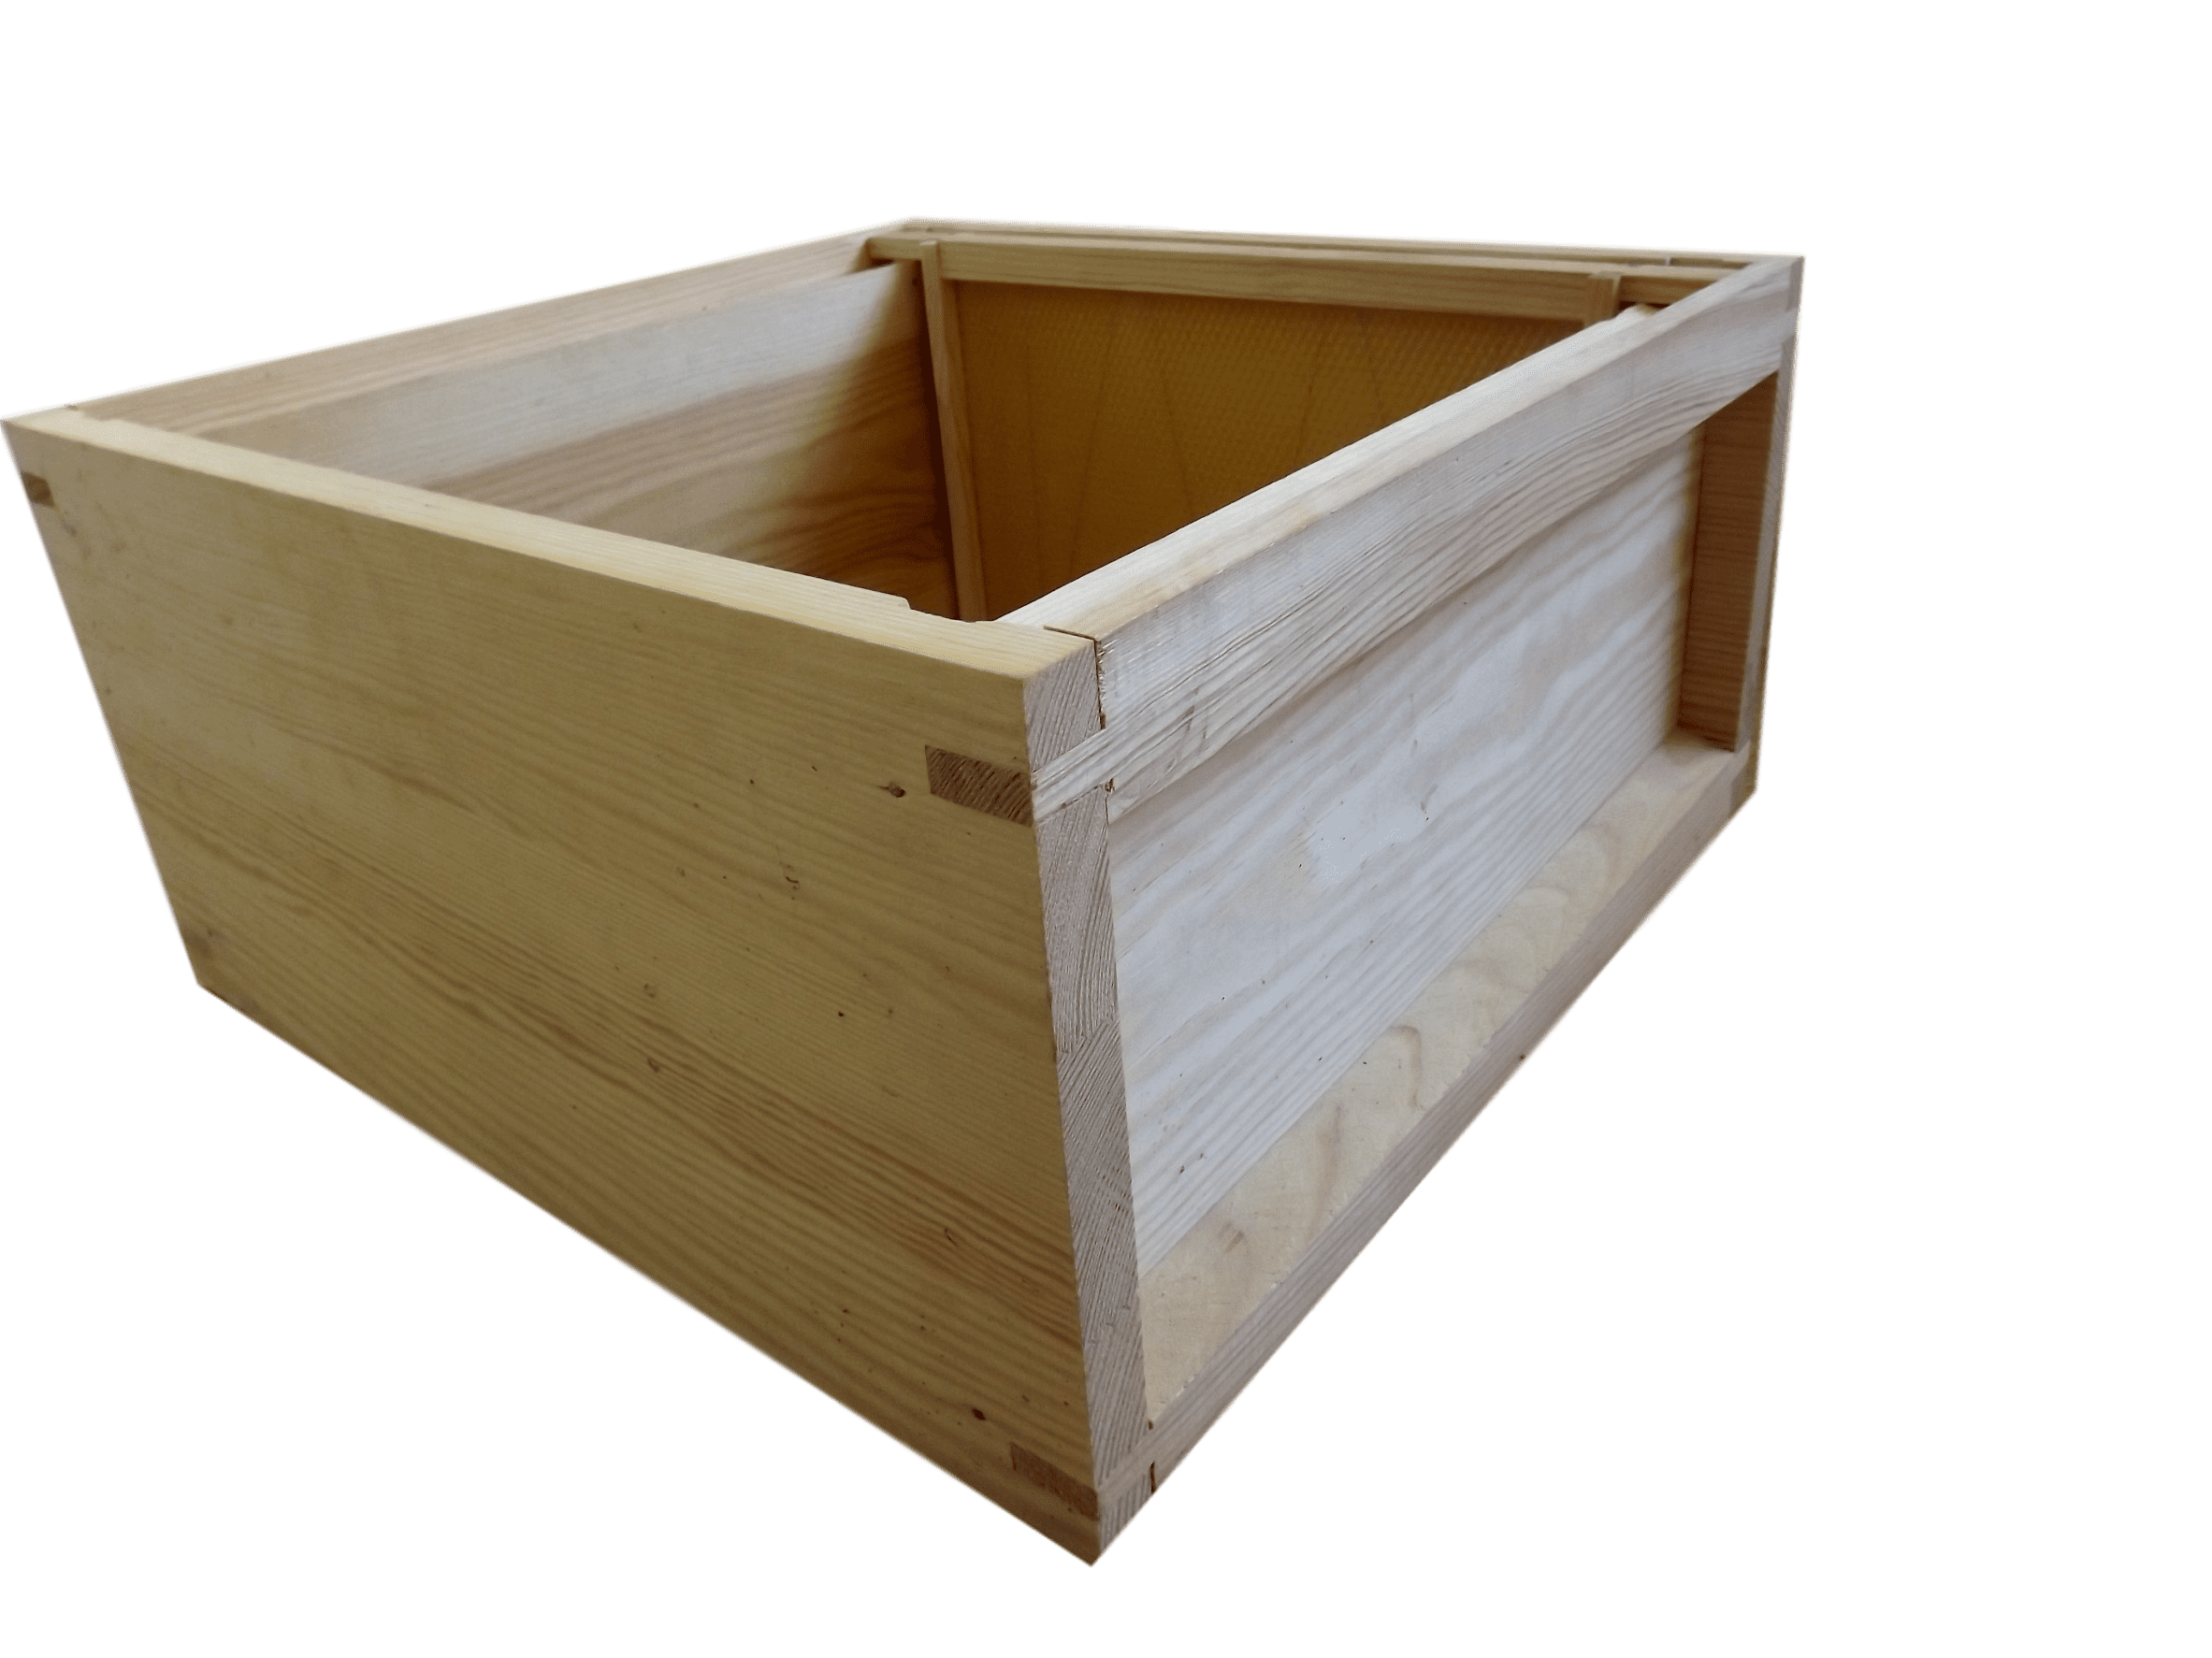 14x12'' Brood Box for a National Beehive - Pine